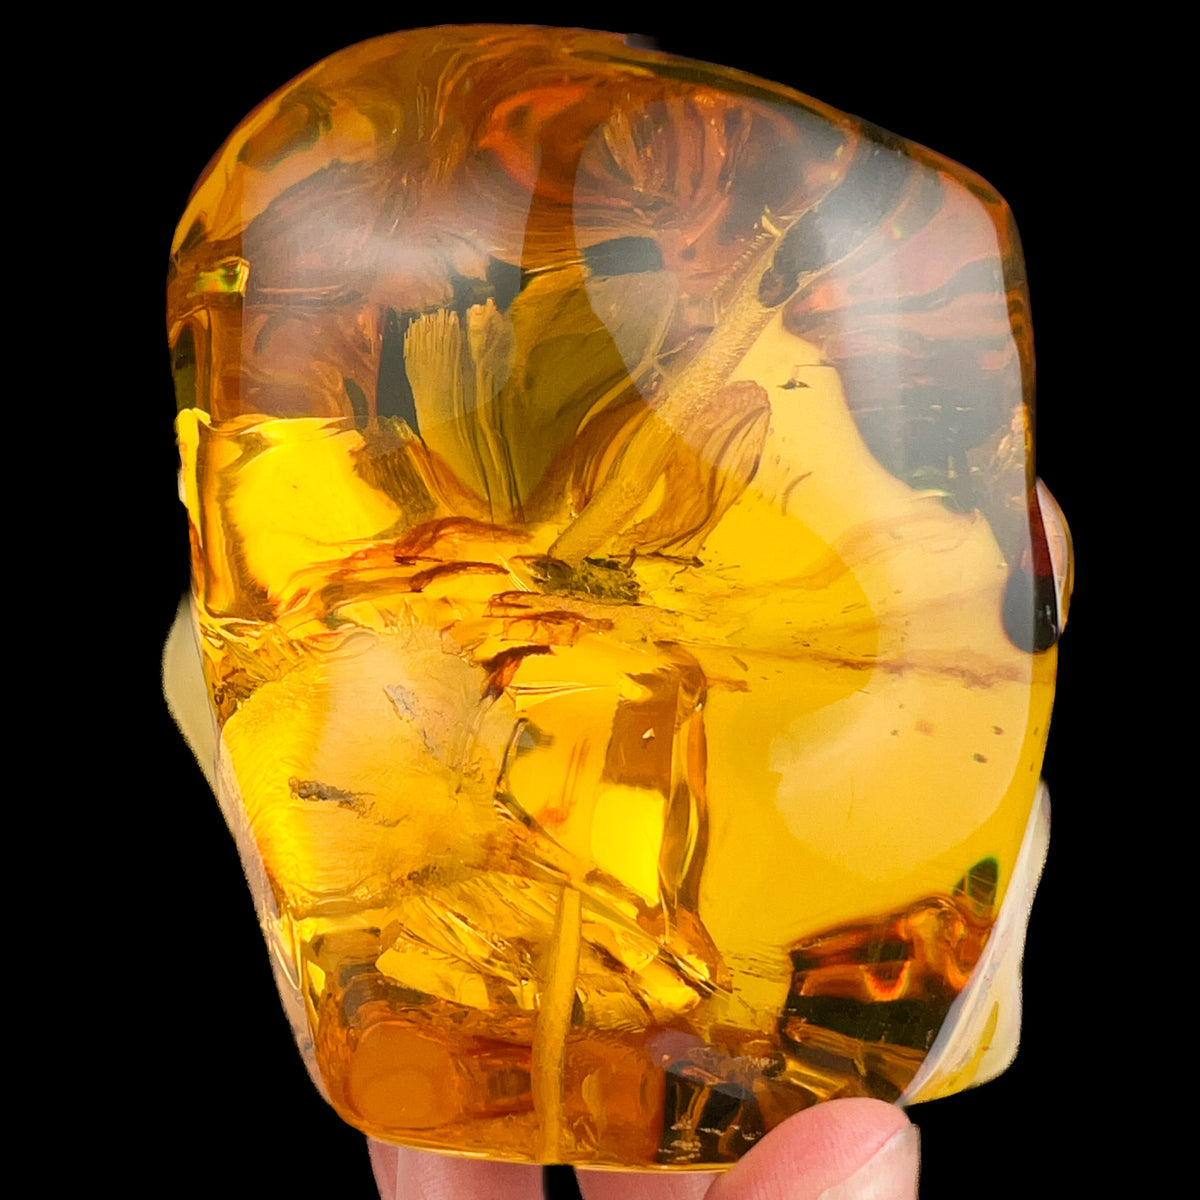 Large polished Copal Amber from Colombia